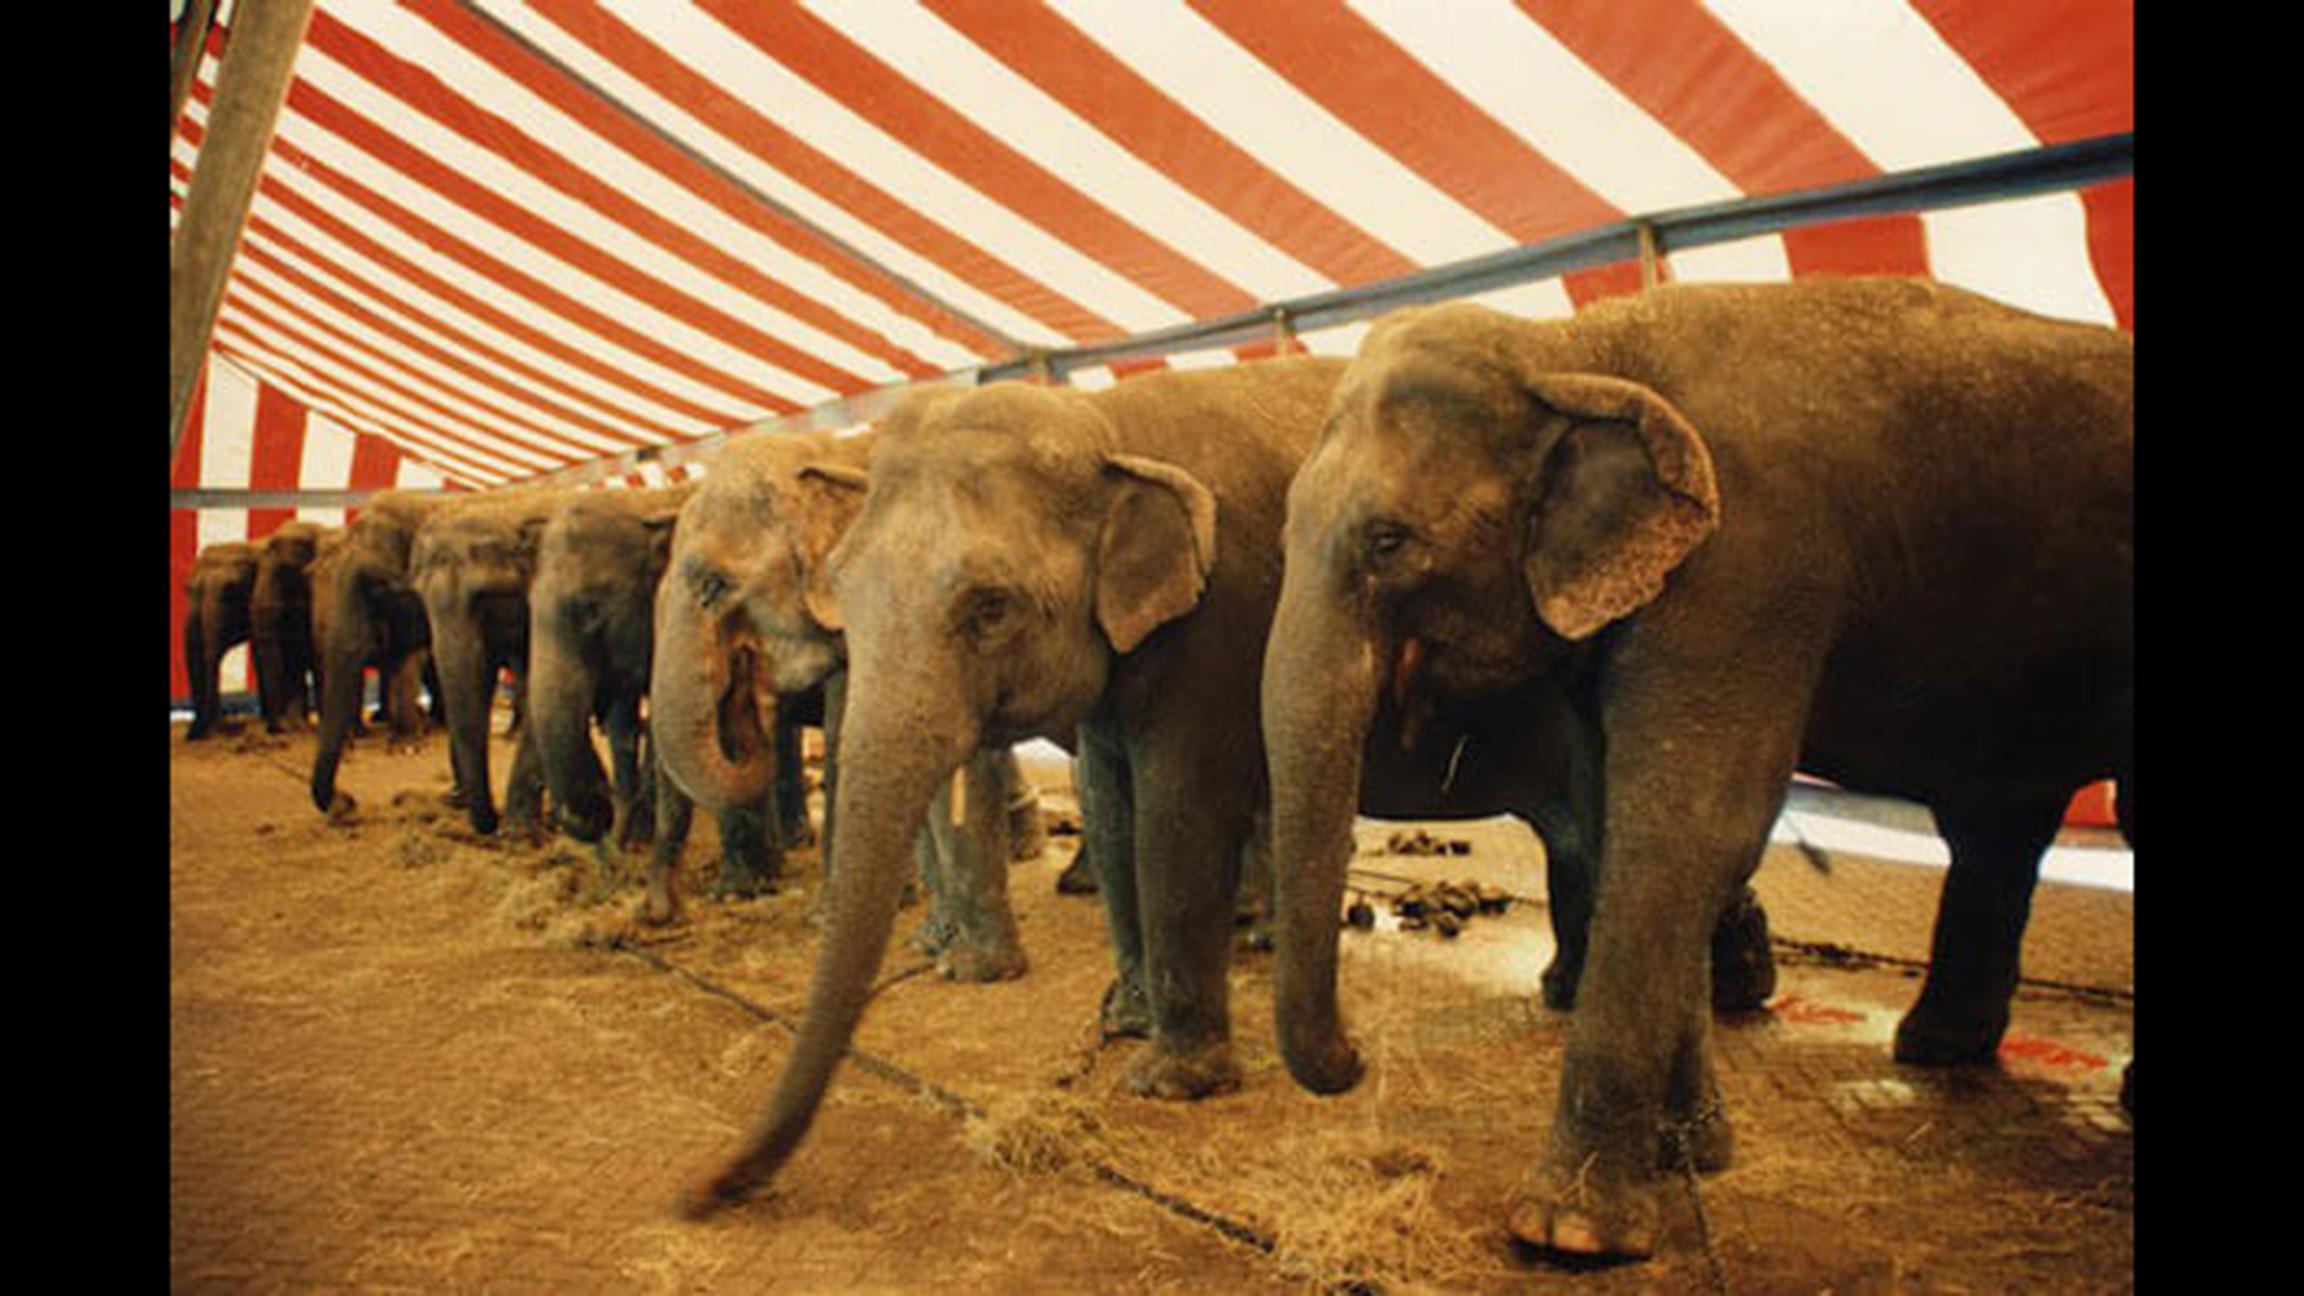 The USDA has cited elephant exhibitors that perform in Illinois for violations of the federal Animal Welfare Act. (Courtesy of PETA)